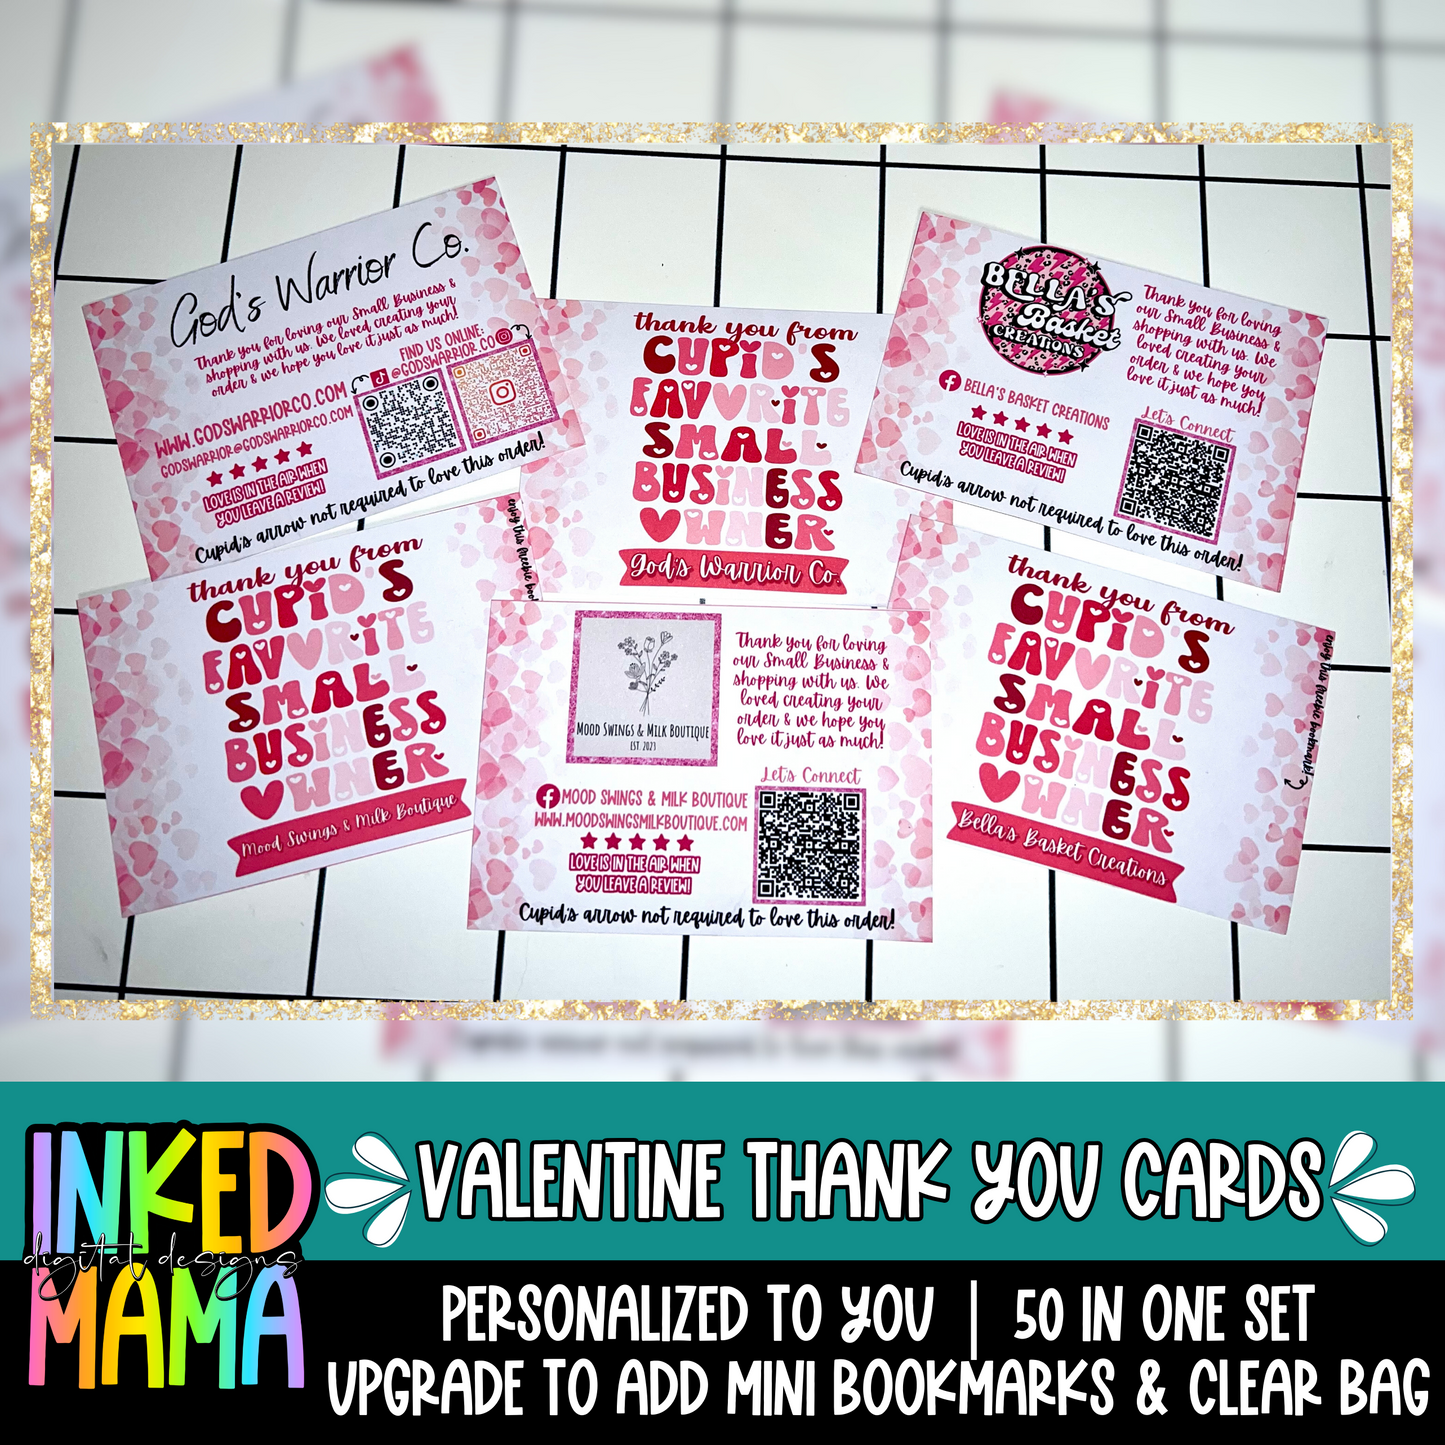 Cupid's Favorite Small Business Owner | Valentine thank you cards | Small Business Packaging Fillers